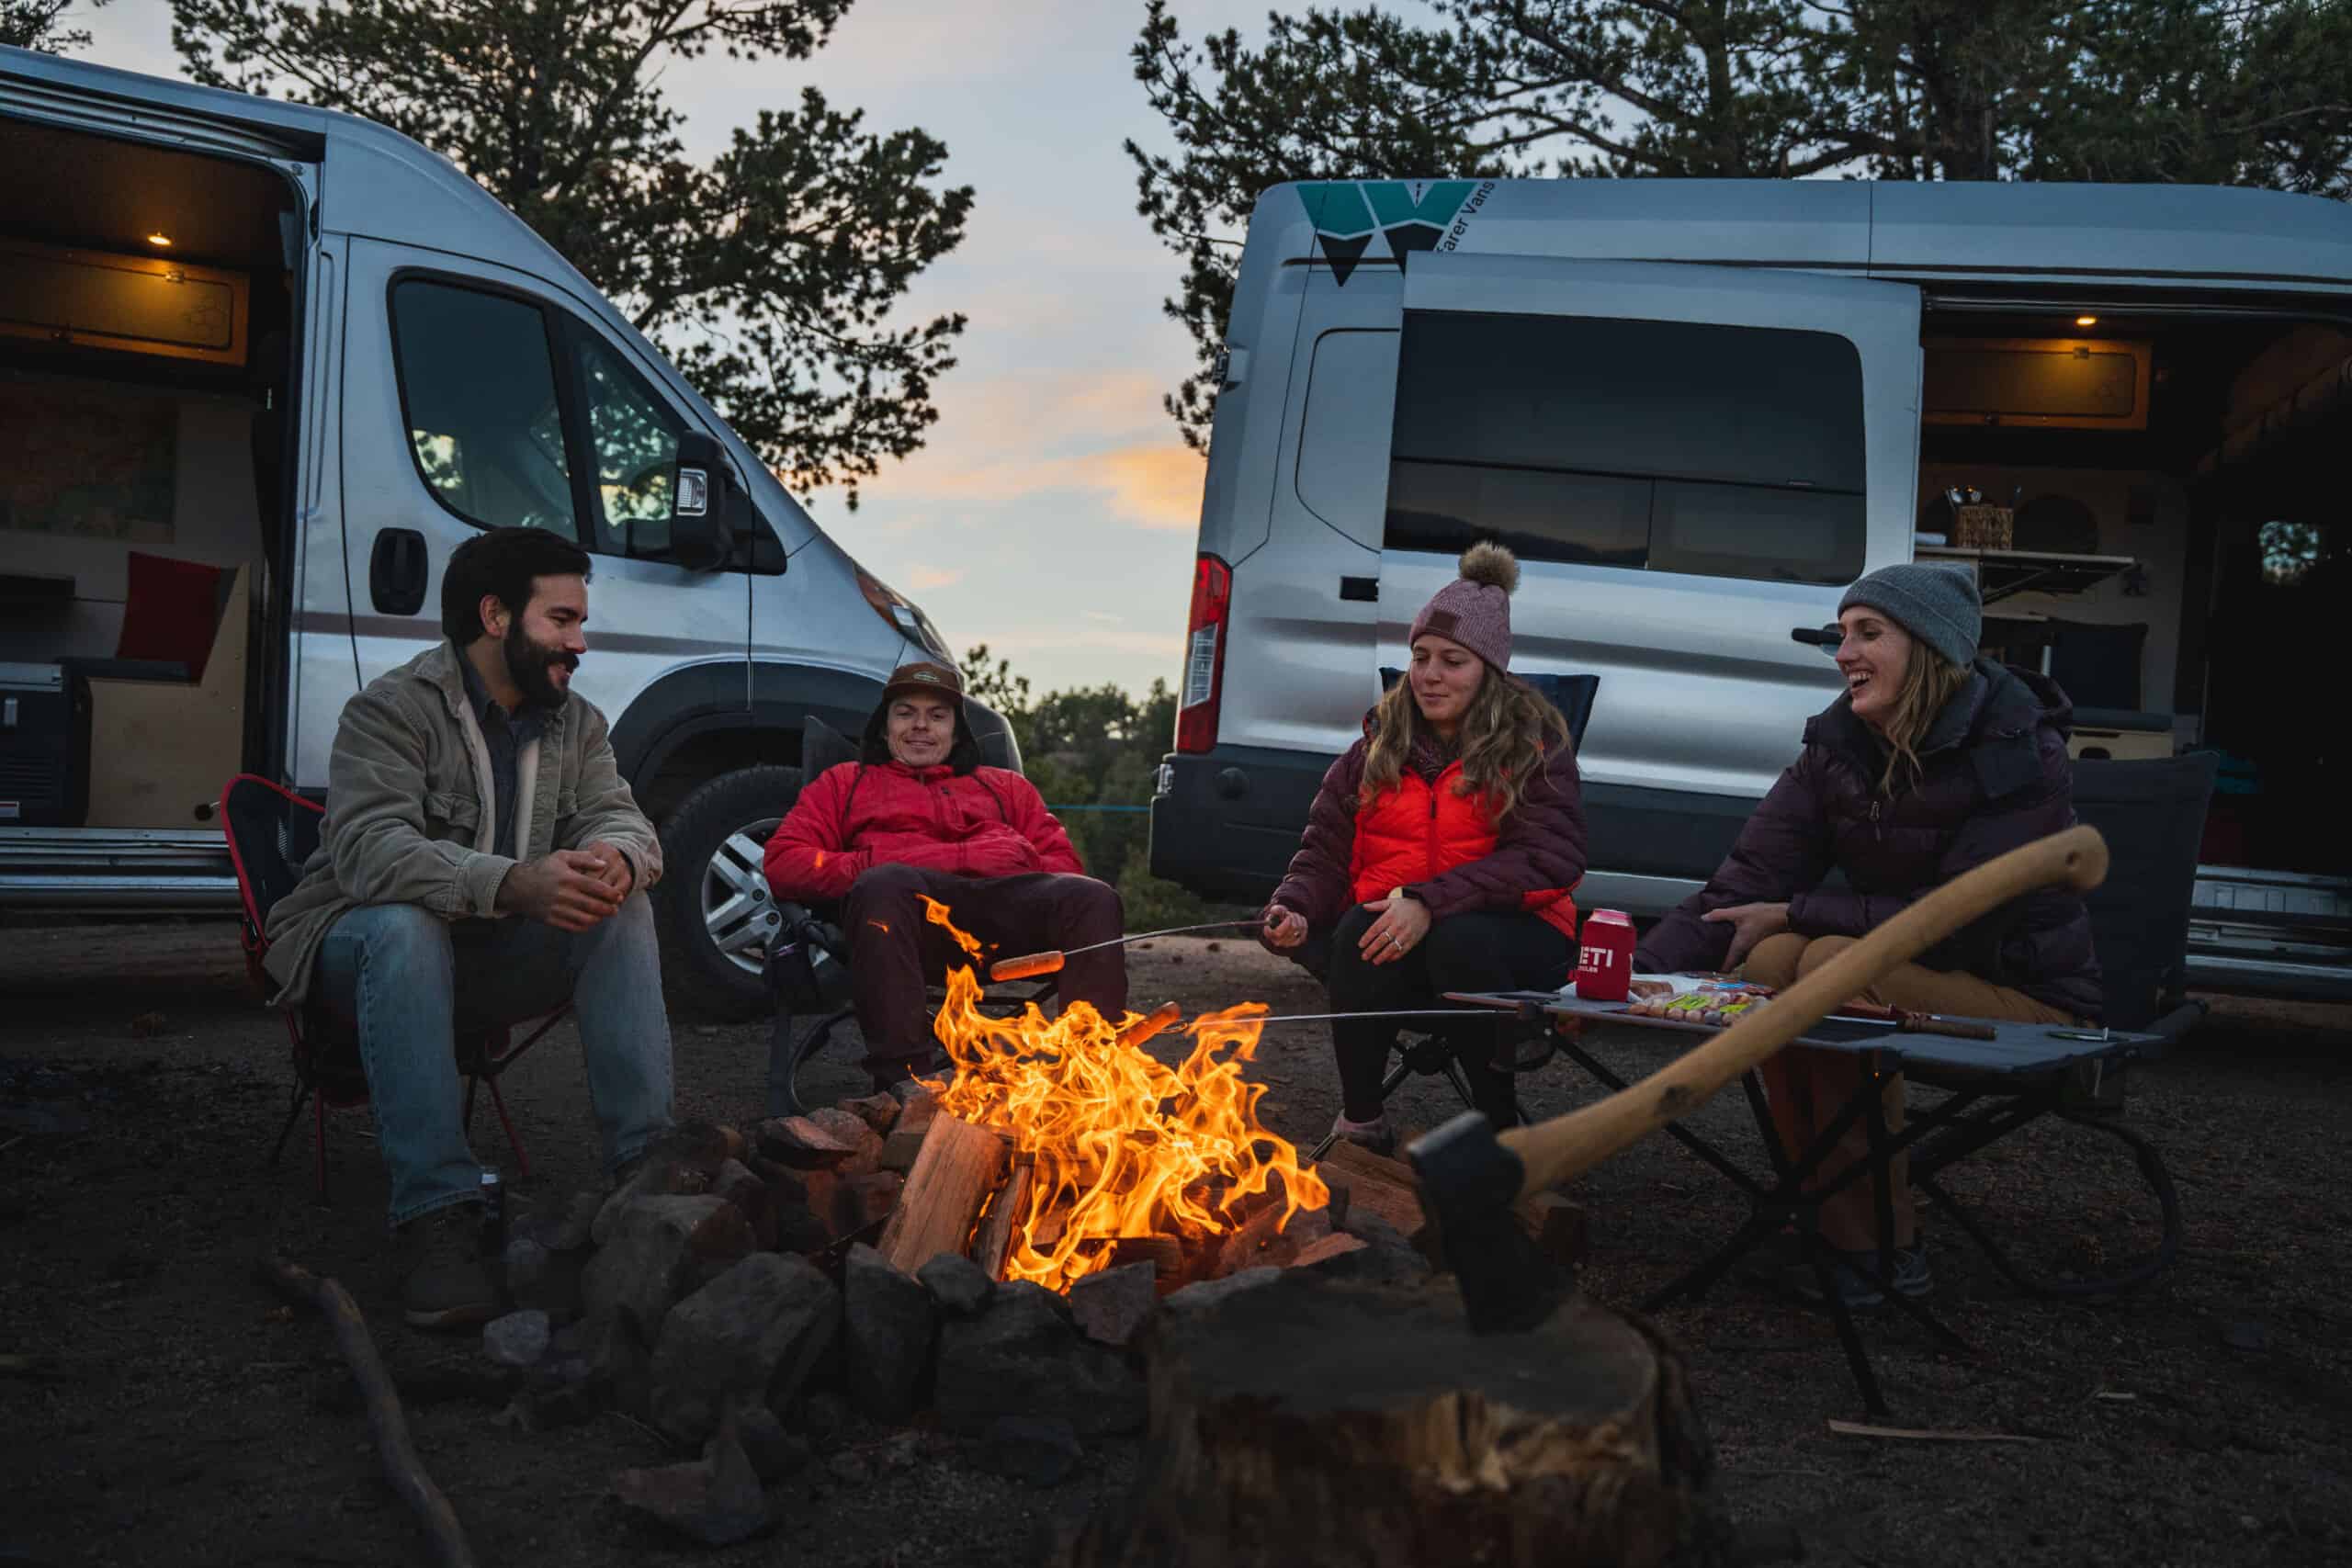 friends around a camp fire with camper van conversions in the background